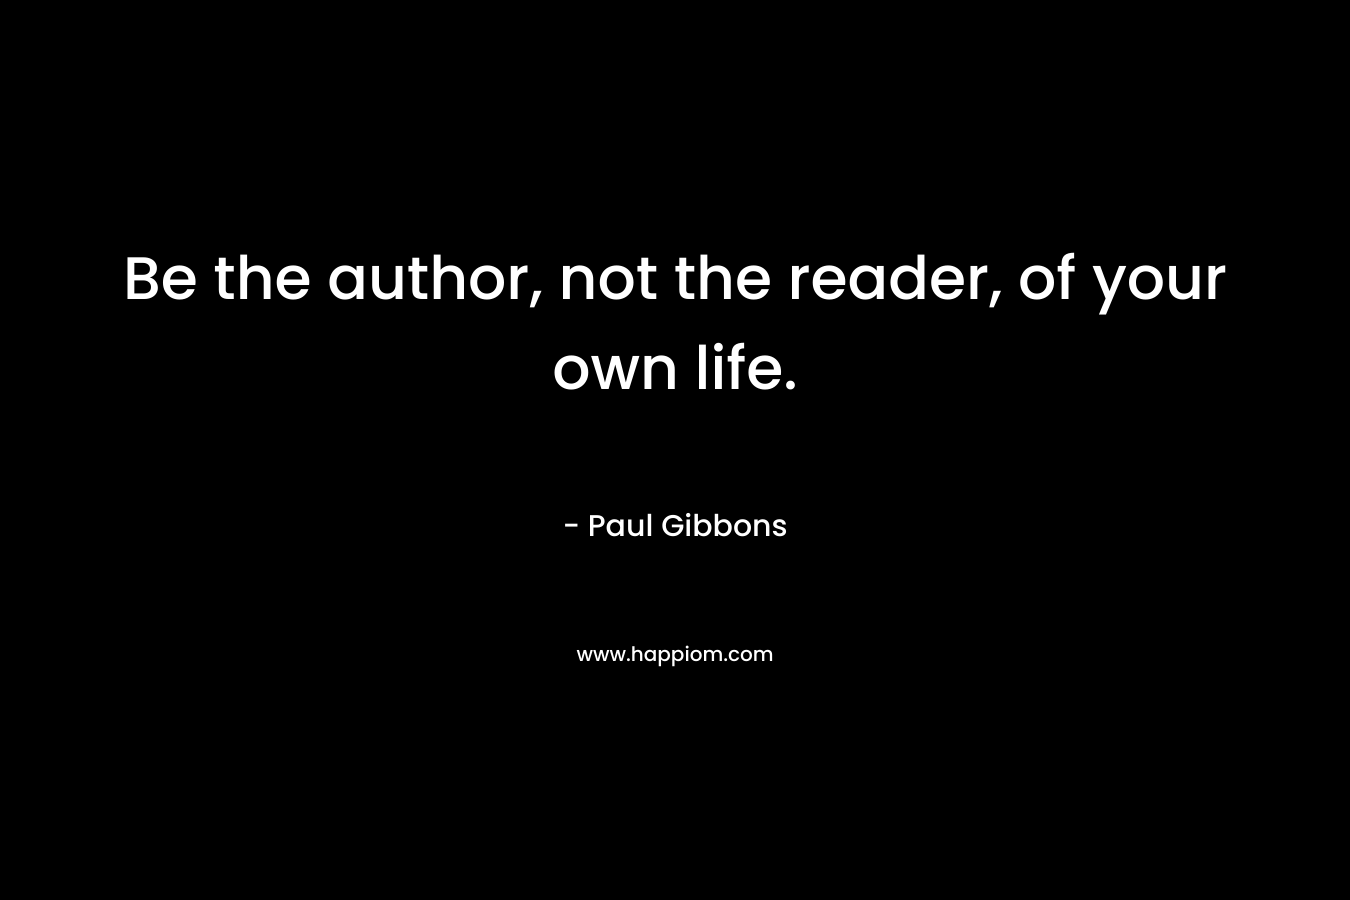 Be the author, not the reader, of your own life. – Paul Gibbons